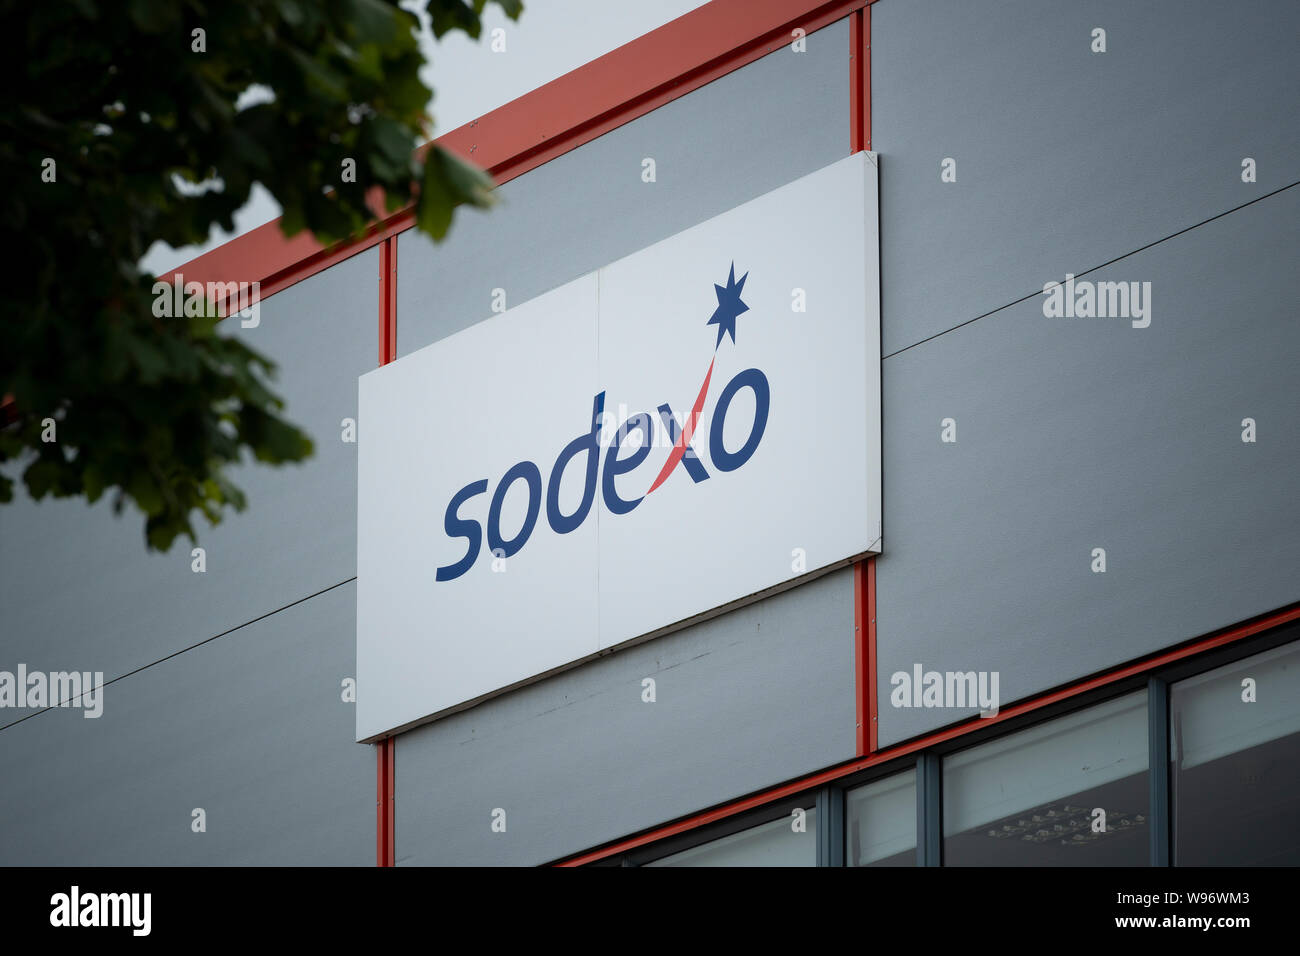 Signage for Sodexo offices in Salford Quays, Manchester, UK. Stock Photo